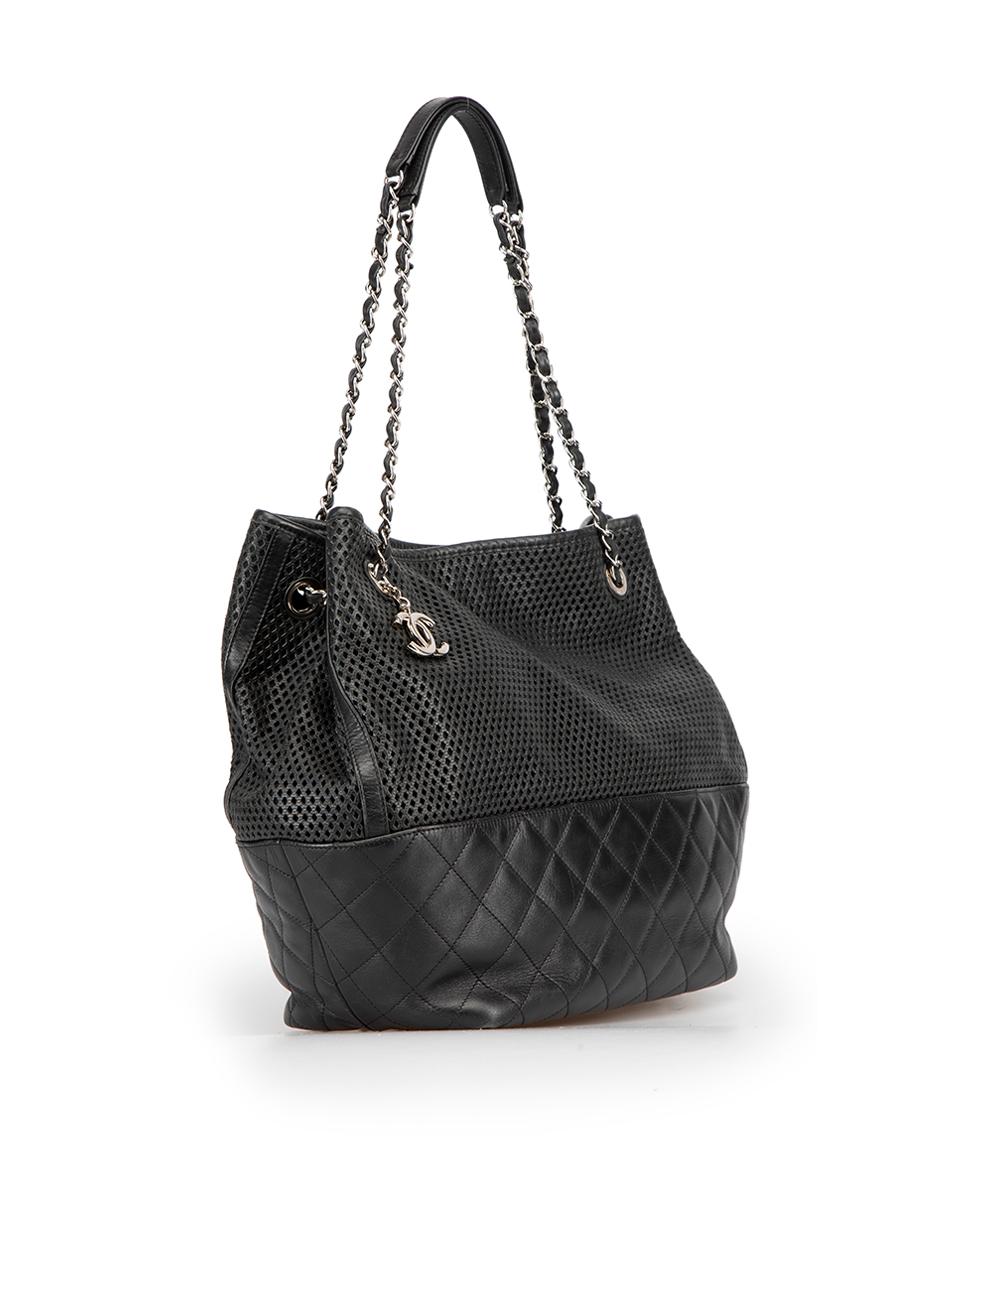 CONDITION is Very good. Minimal wear to bag is evident. Minimal wear to the base corners, the front and the back with scuff marks to the leather on this used Chanel designer resale item. This item comes with original dust